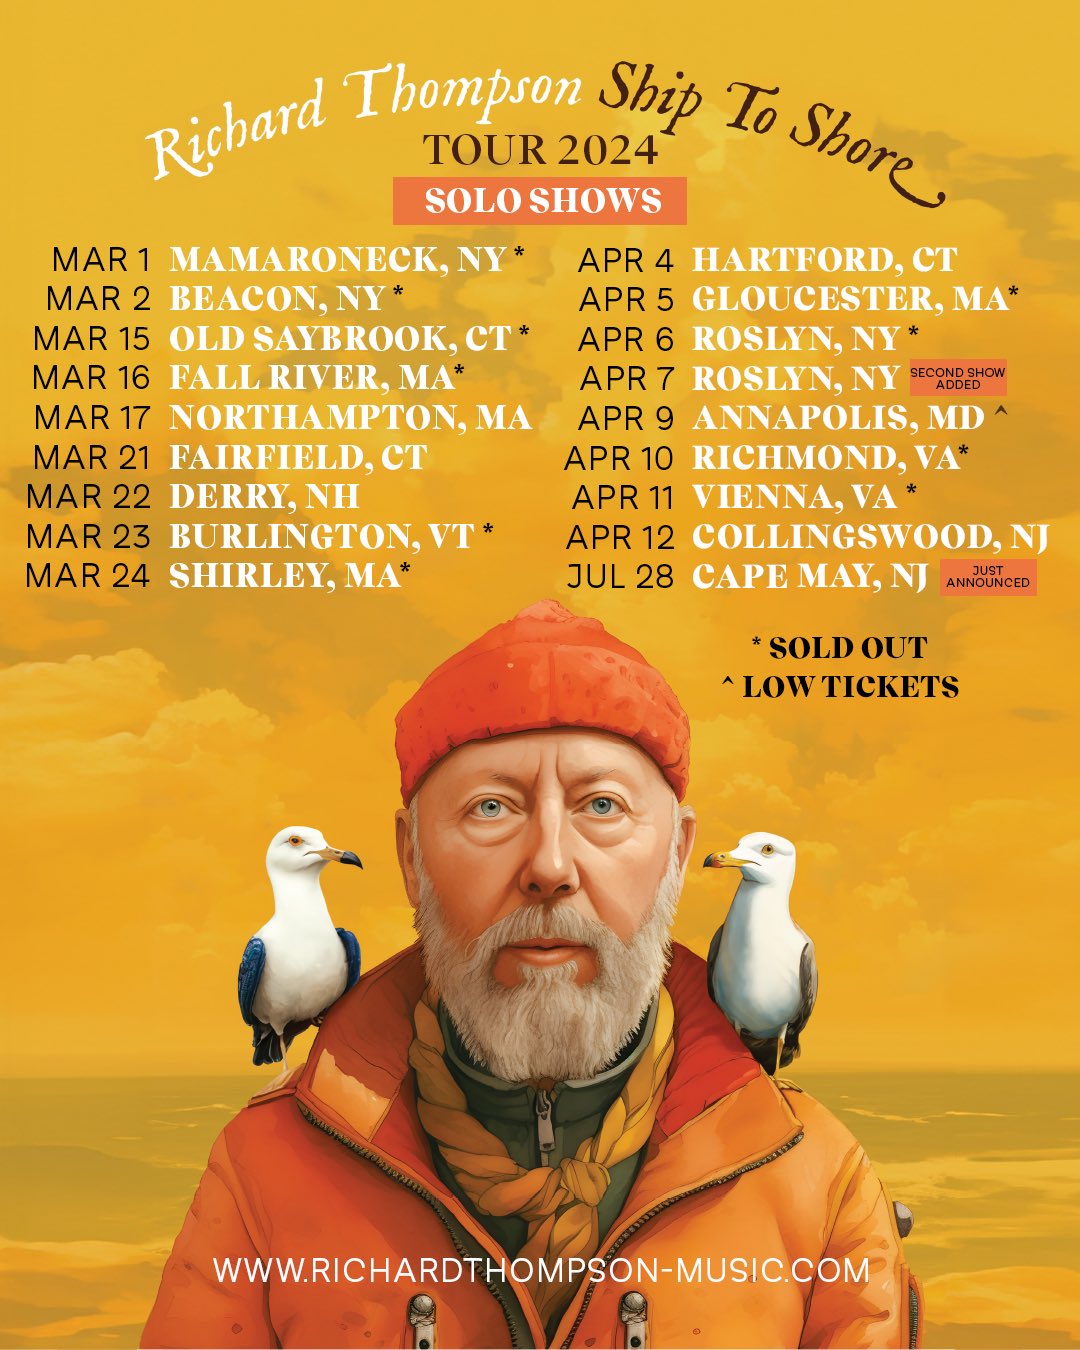 Richard Thompson on X: Tickets are on sale and going fast for